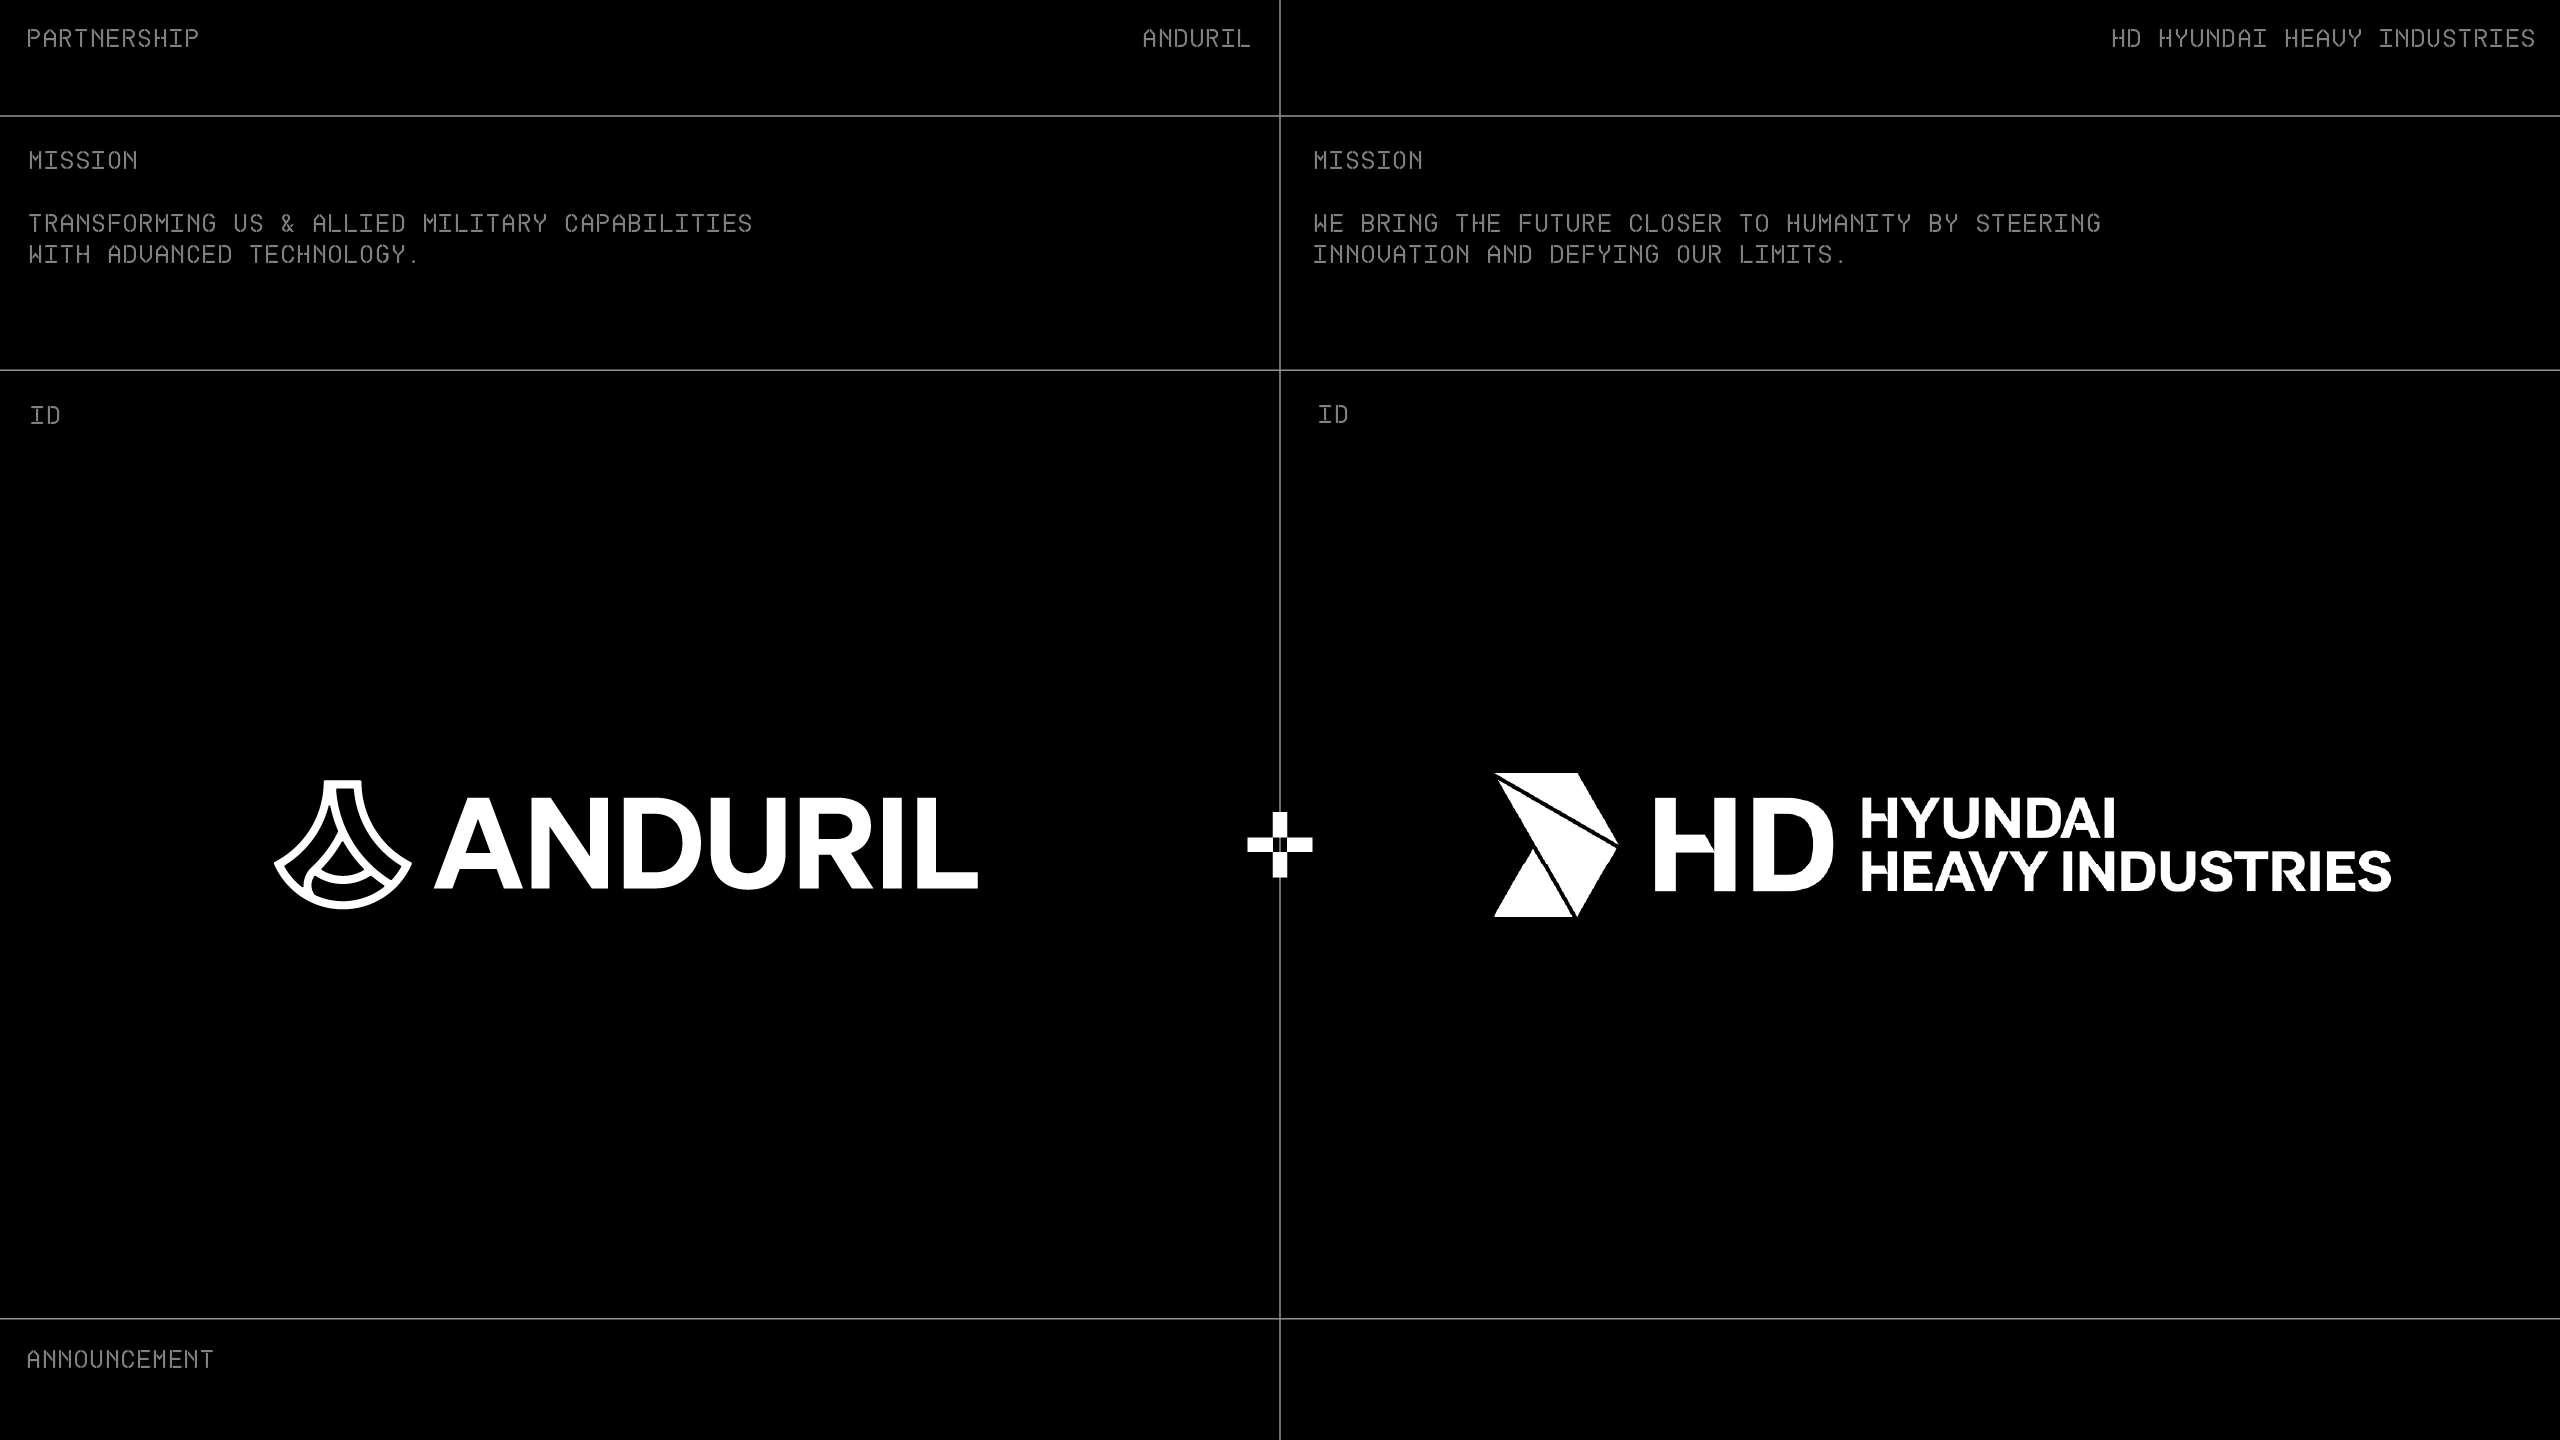 HD Hyundai and Anduril Industries Announce Strategic Partnership on Maritime Systems, Autonomy and Mass Manufacturing